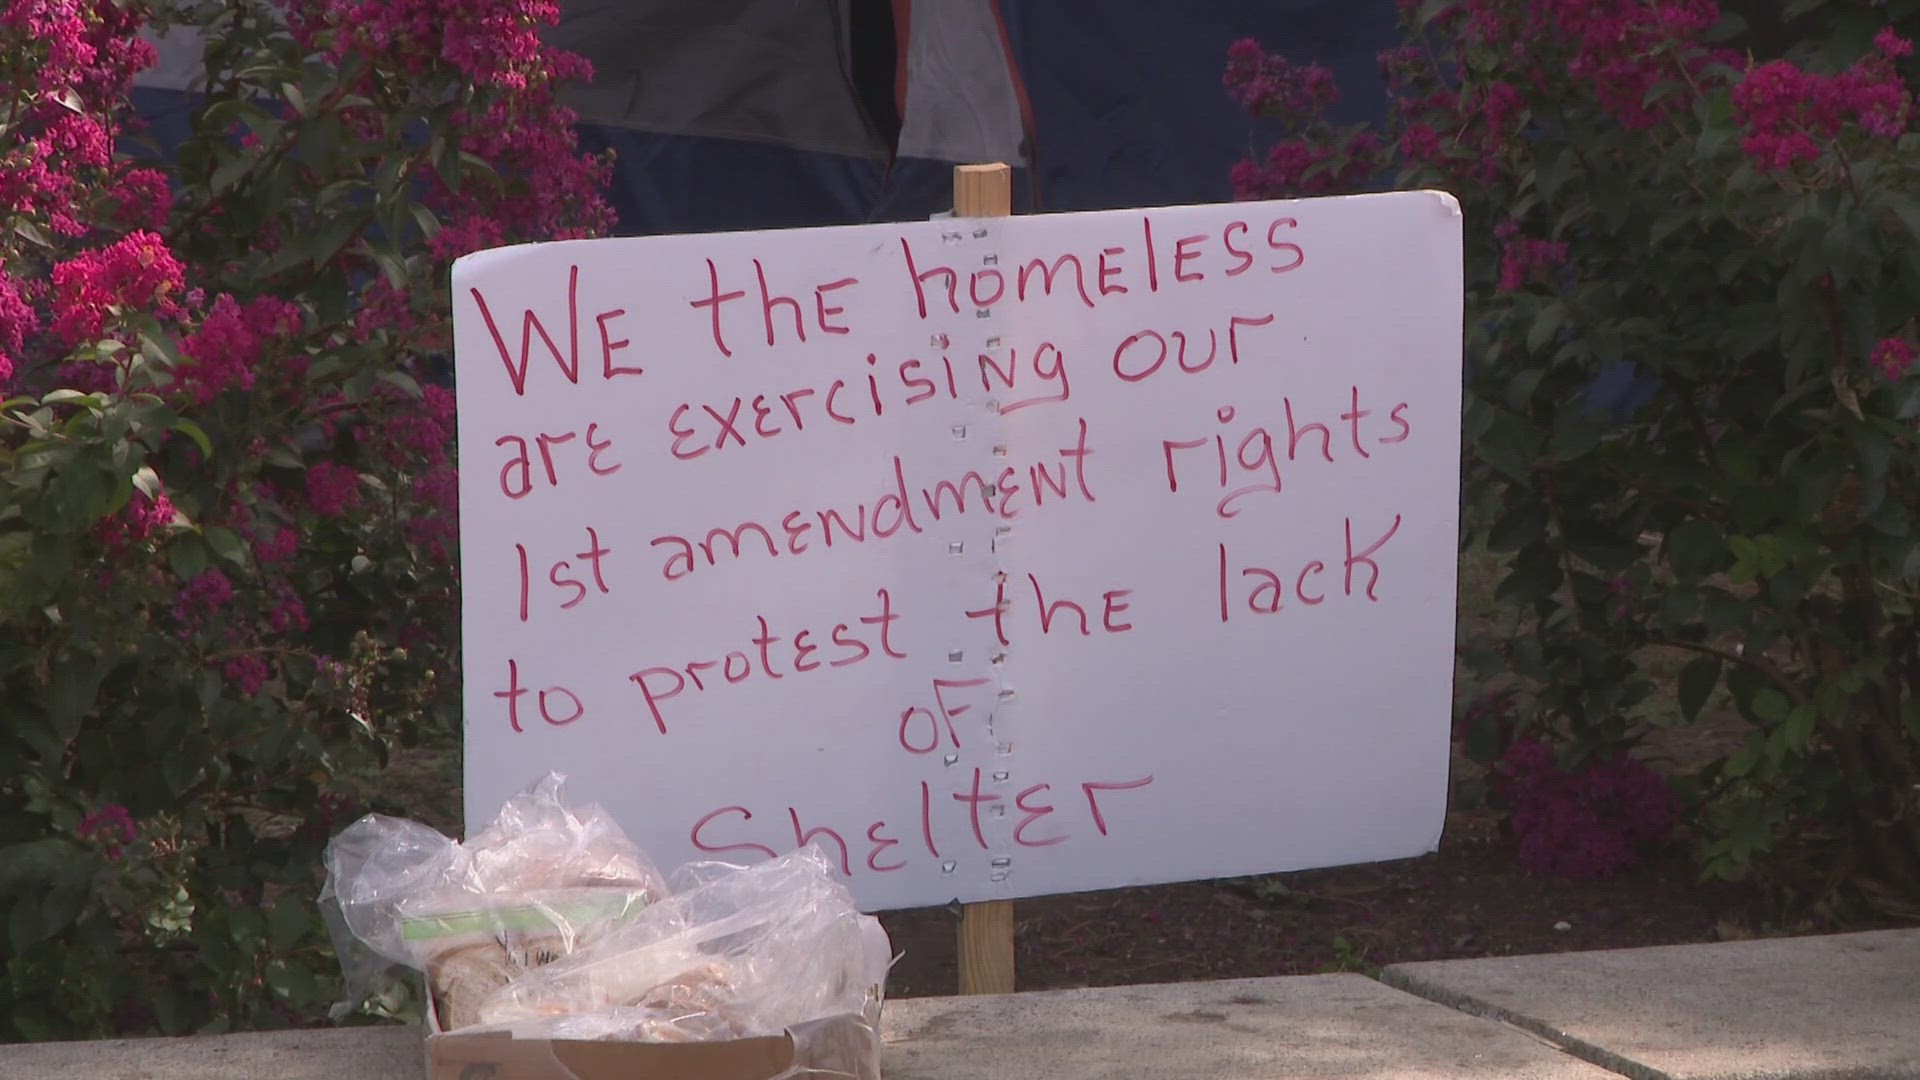 Mayor Tishaura Jones is facing backlash after ordering evictions for the homeless encampment on City Hall lawn. A curfew will be enforced Tuesday night.